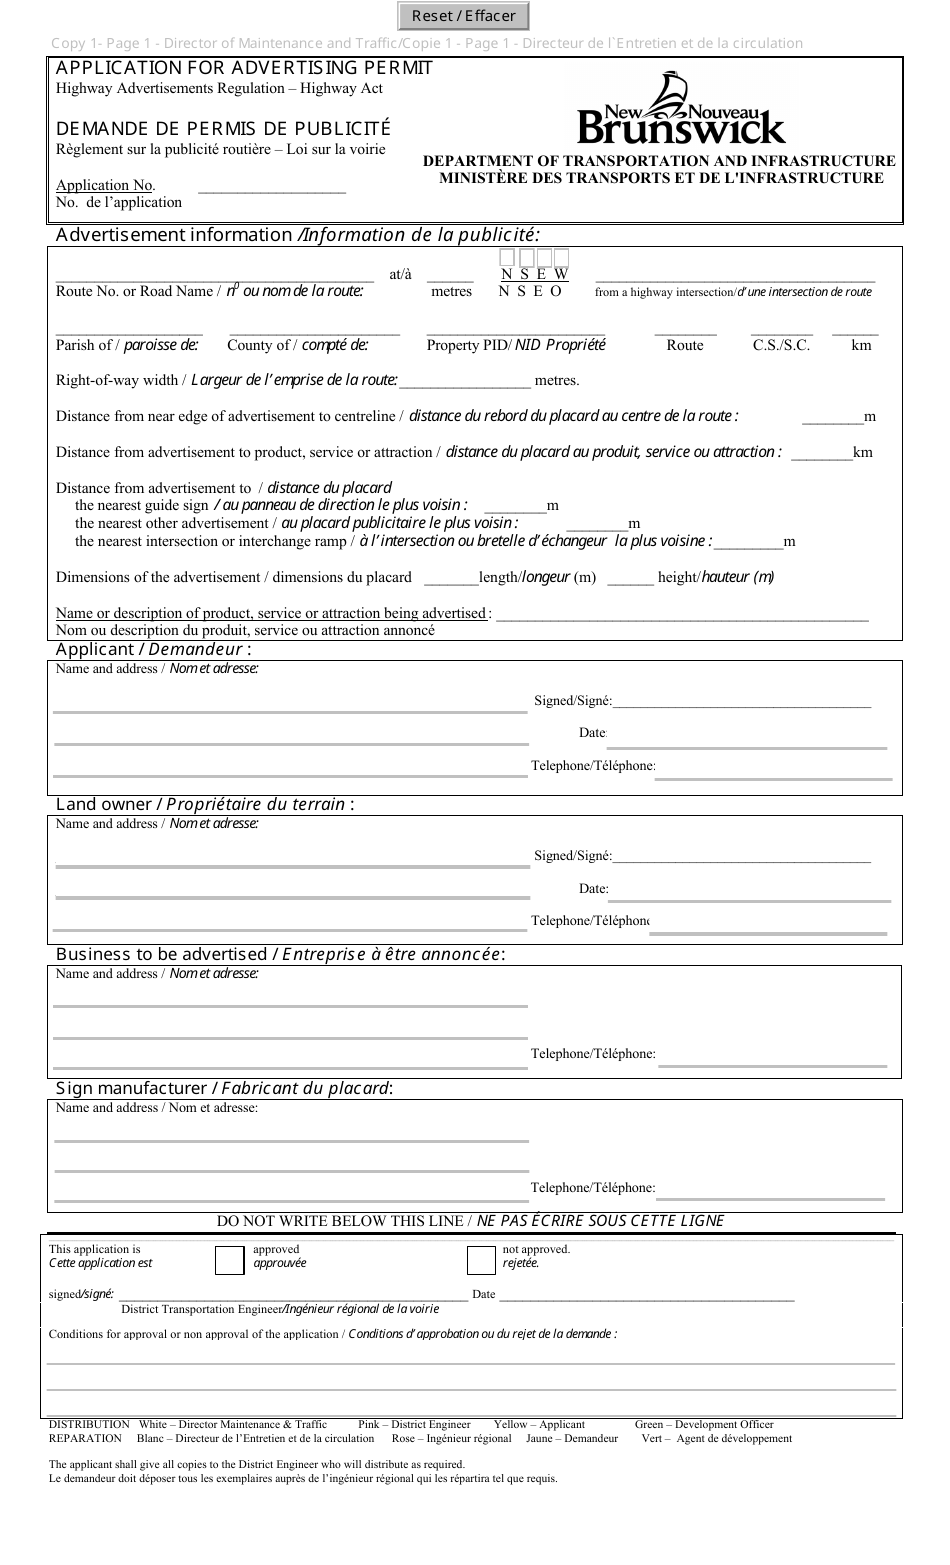 Application for Advertising Permit - New Brunswick, Canada (English / French), Page 1